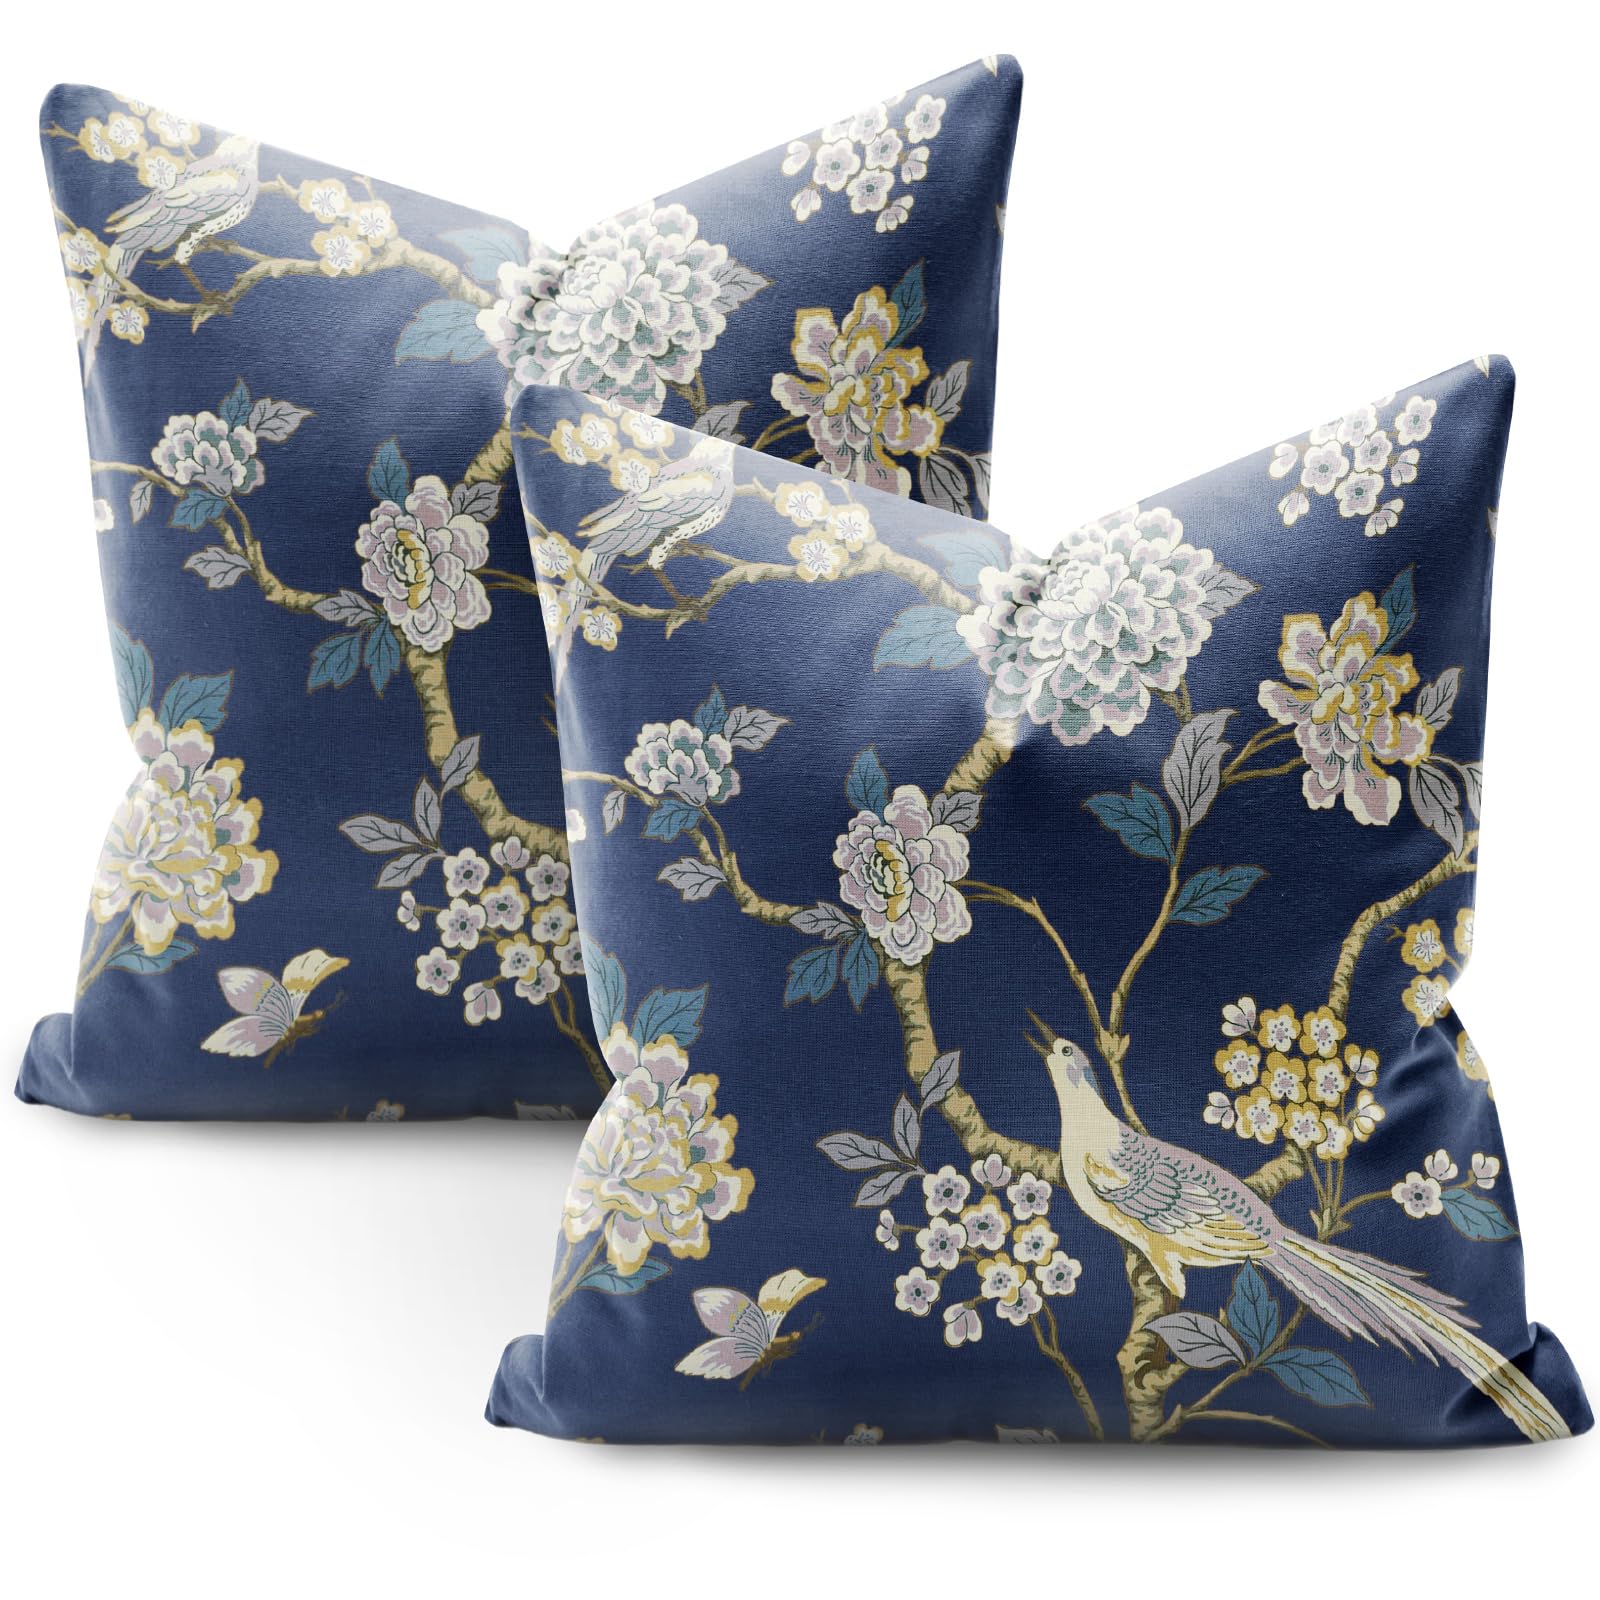 Mua SMF Chinoiserie Pillow Covers 18x18 Set of 2 Flower and Bird ...